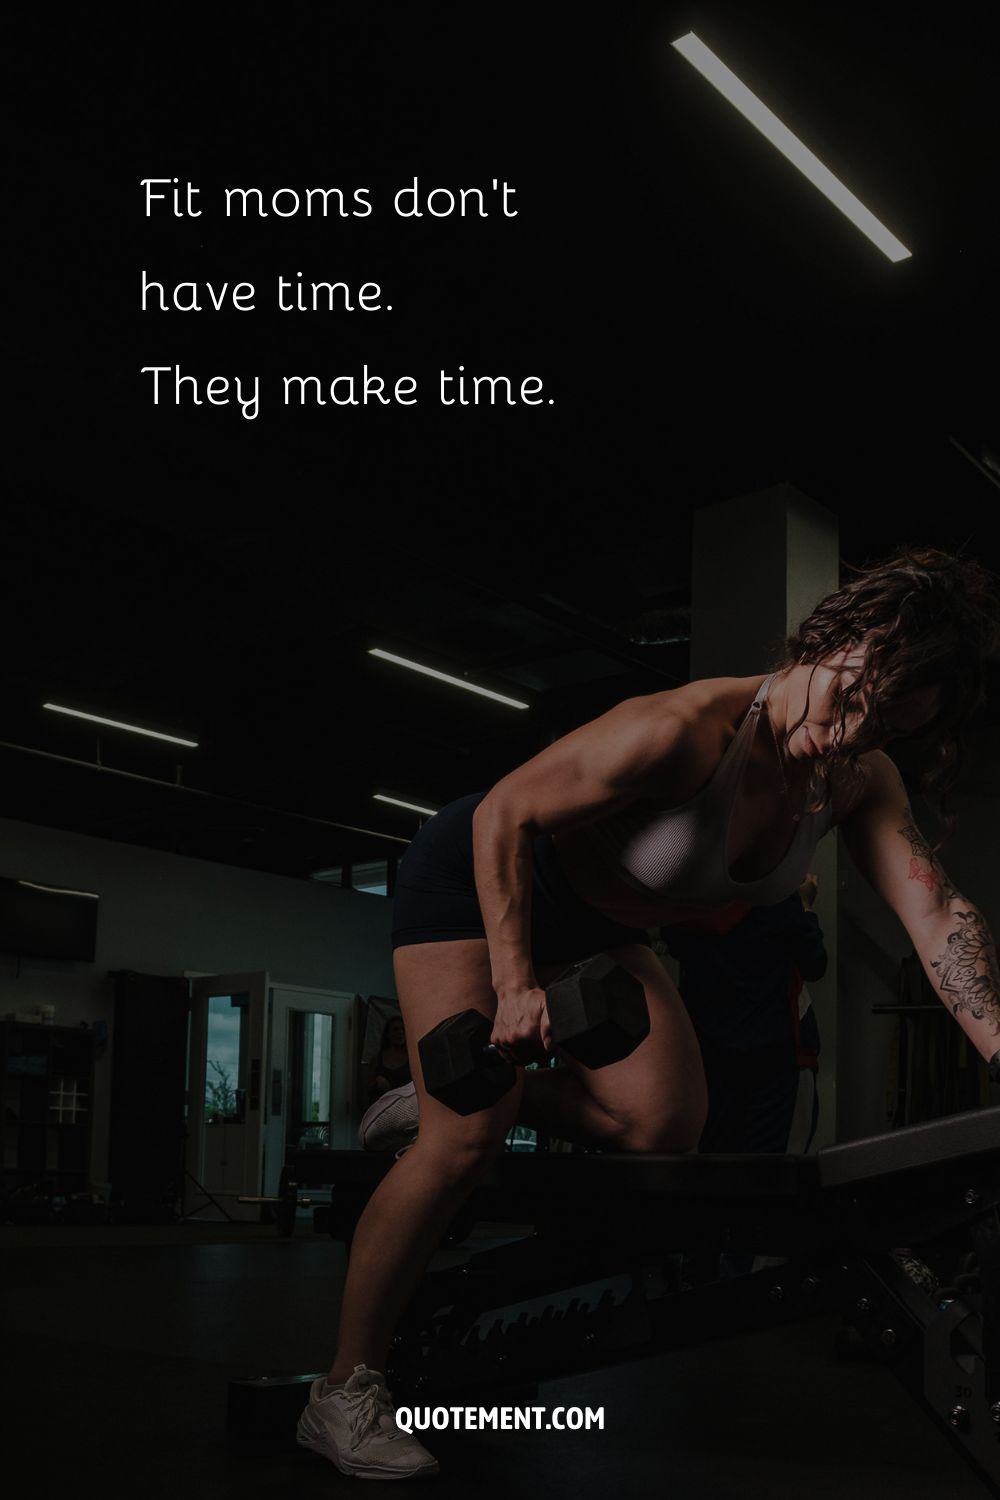 Fit moms don’t have time. They make time.